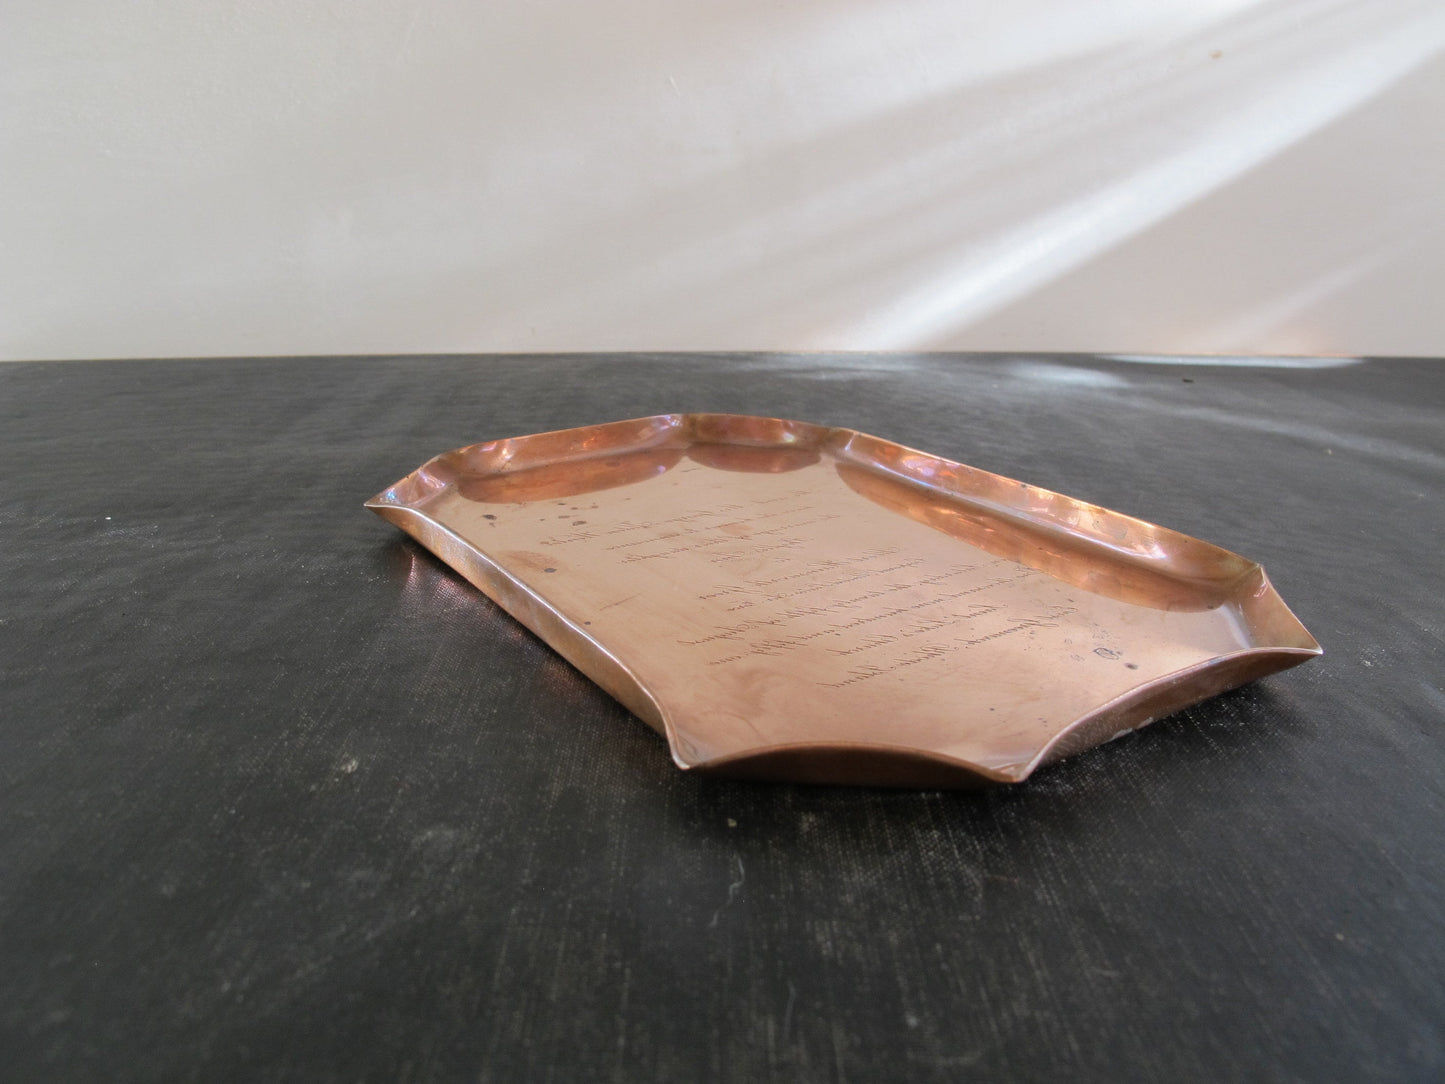 Copper Tray Made from Wedding Engraved Invitation Plate Mr. and Mrs. George Alden Winter 1951 1950s